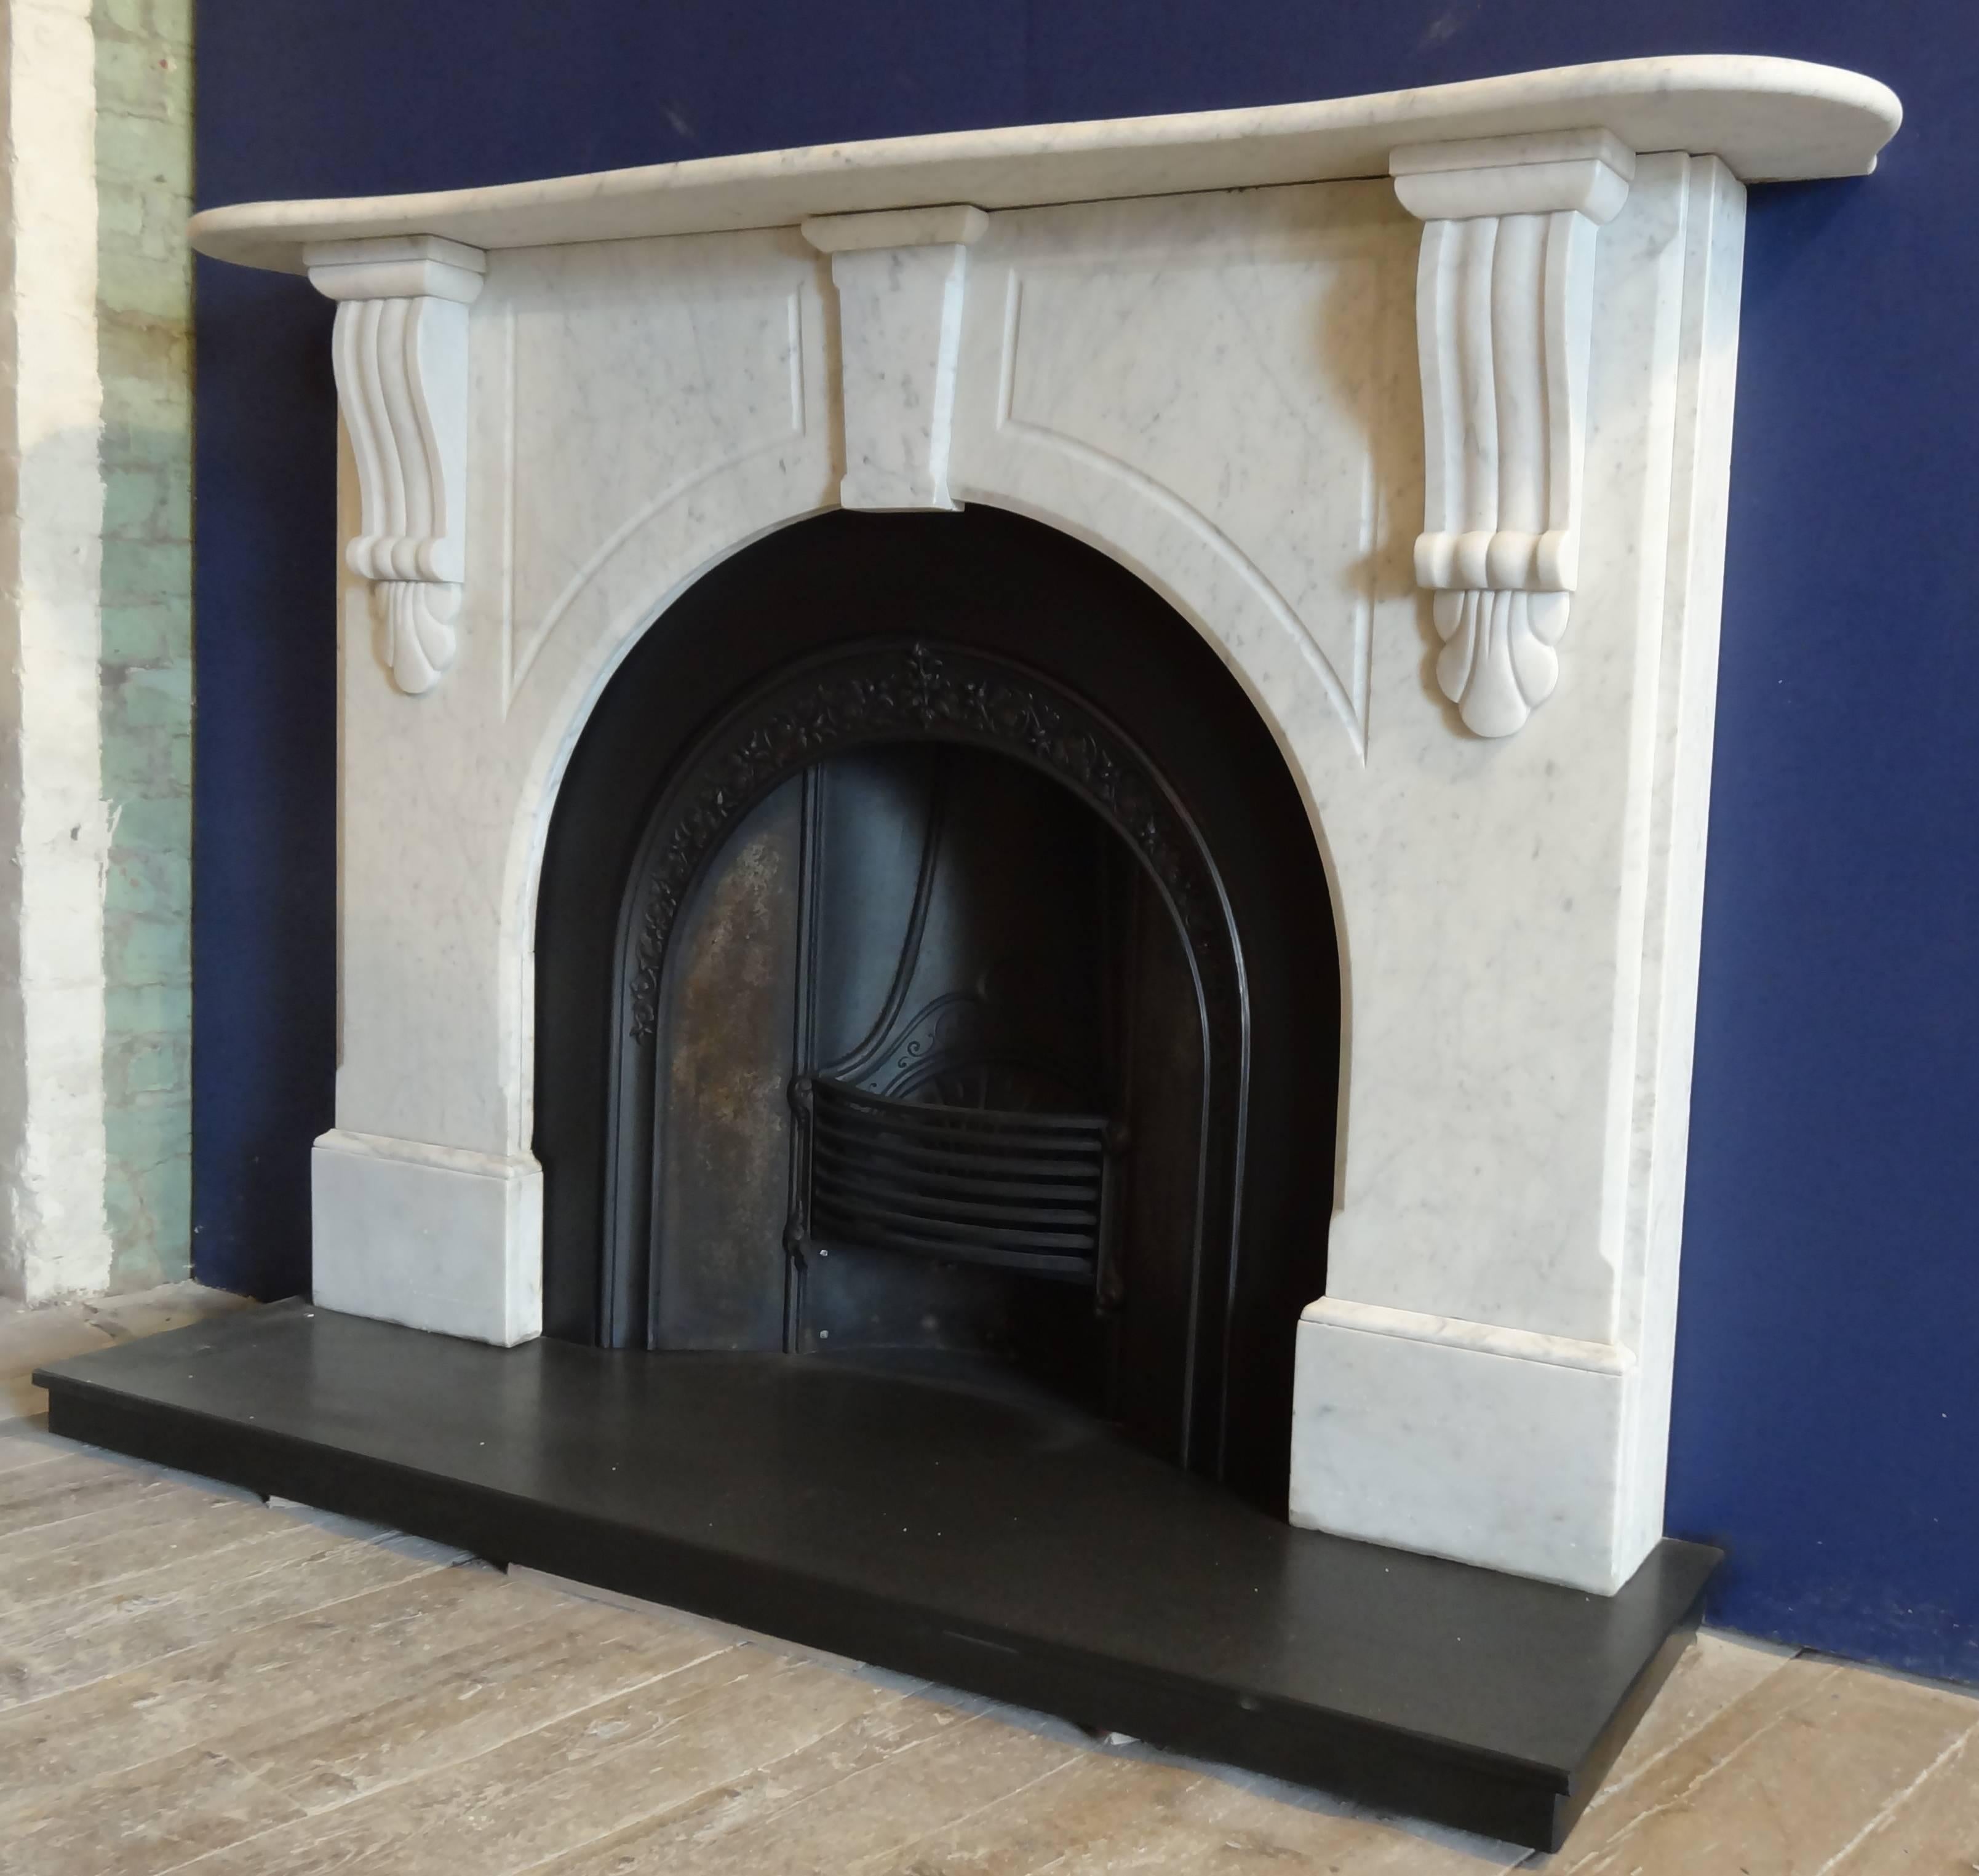 Antique Victorian white Carrara marble fireplace surround. The fireplace has an arched aperture, fluted corbels and panels, centre keystone and serpentine mantel. Reclaimed from a Victorian property in county Antrim Northern Ireland.
Cast Iron